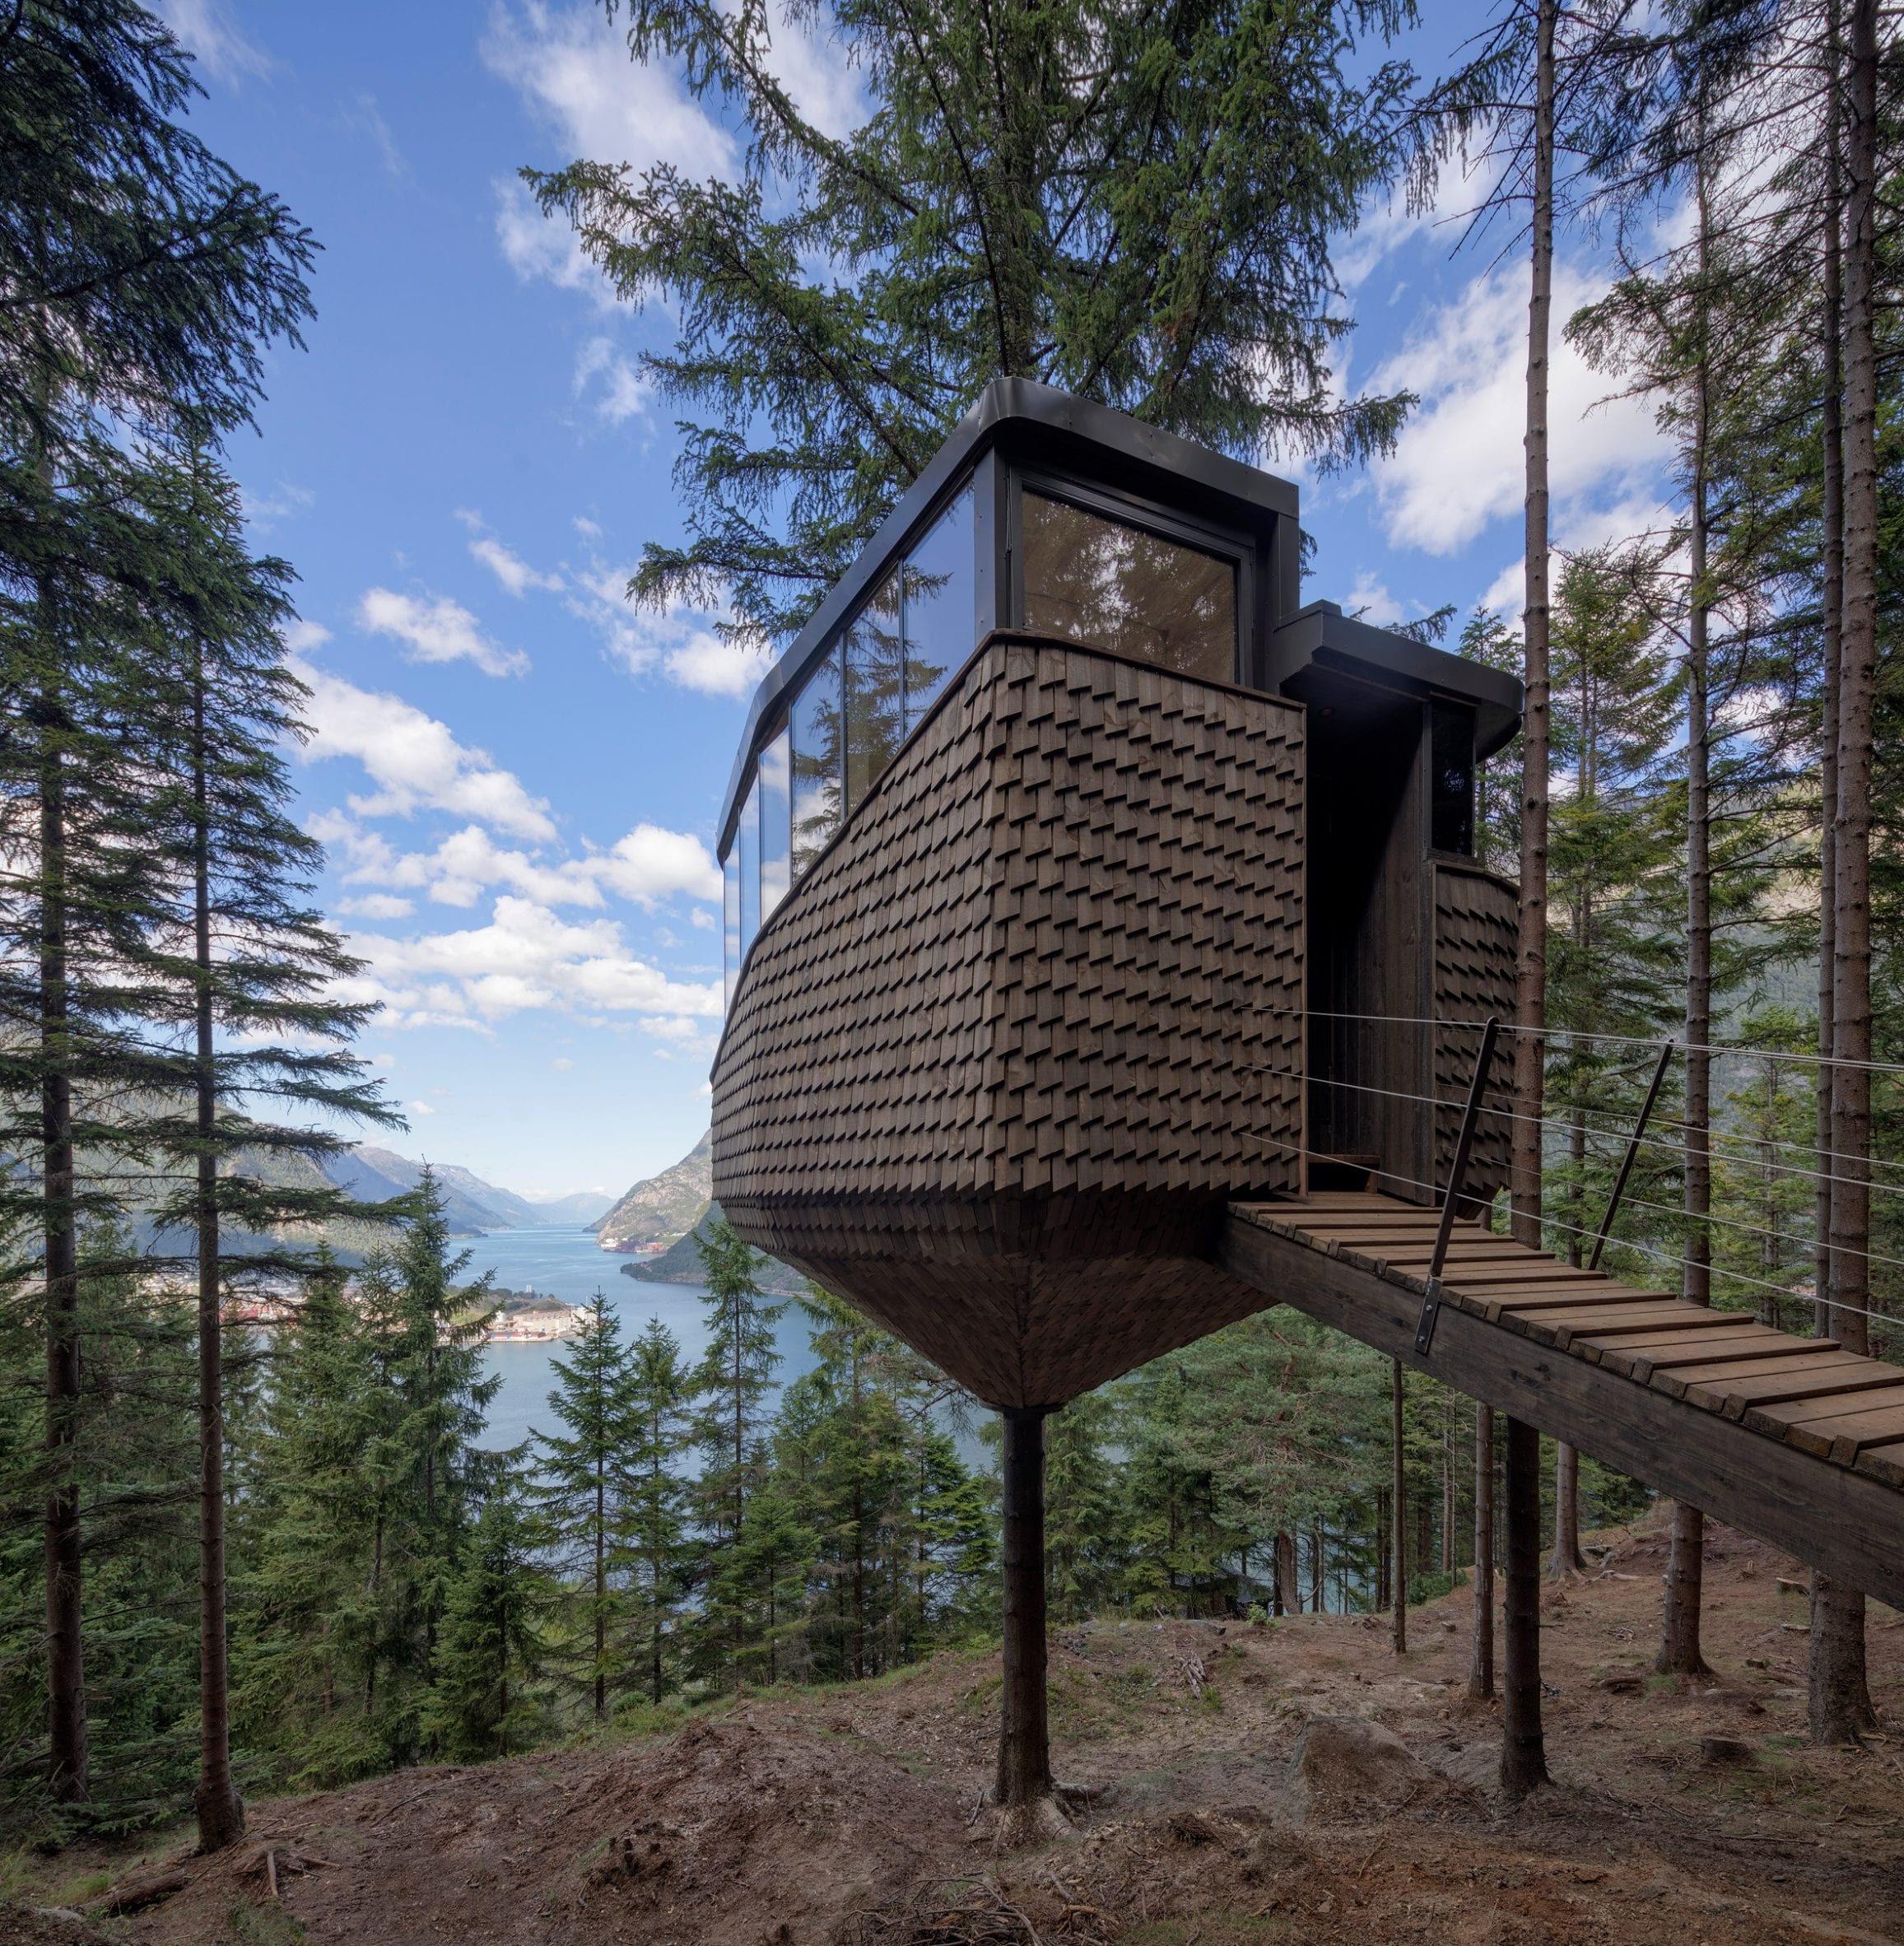  The woodnest treehouses neglect the fjord